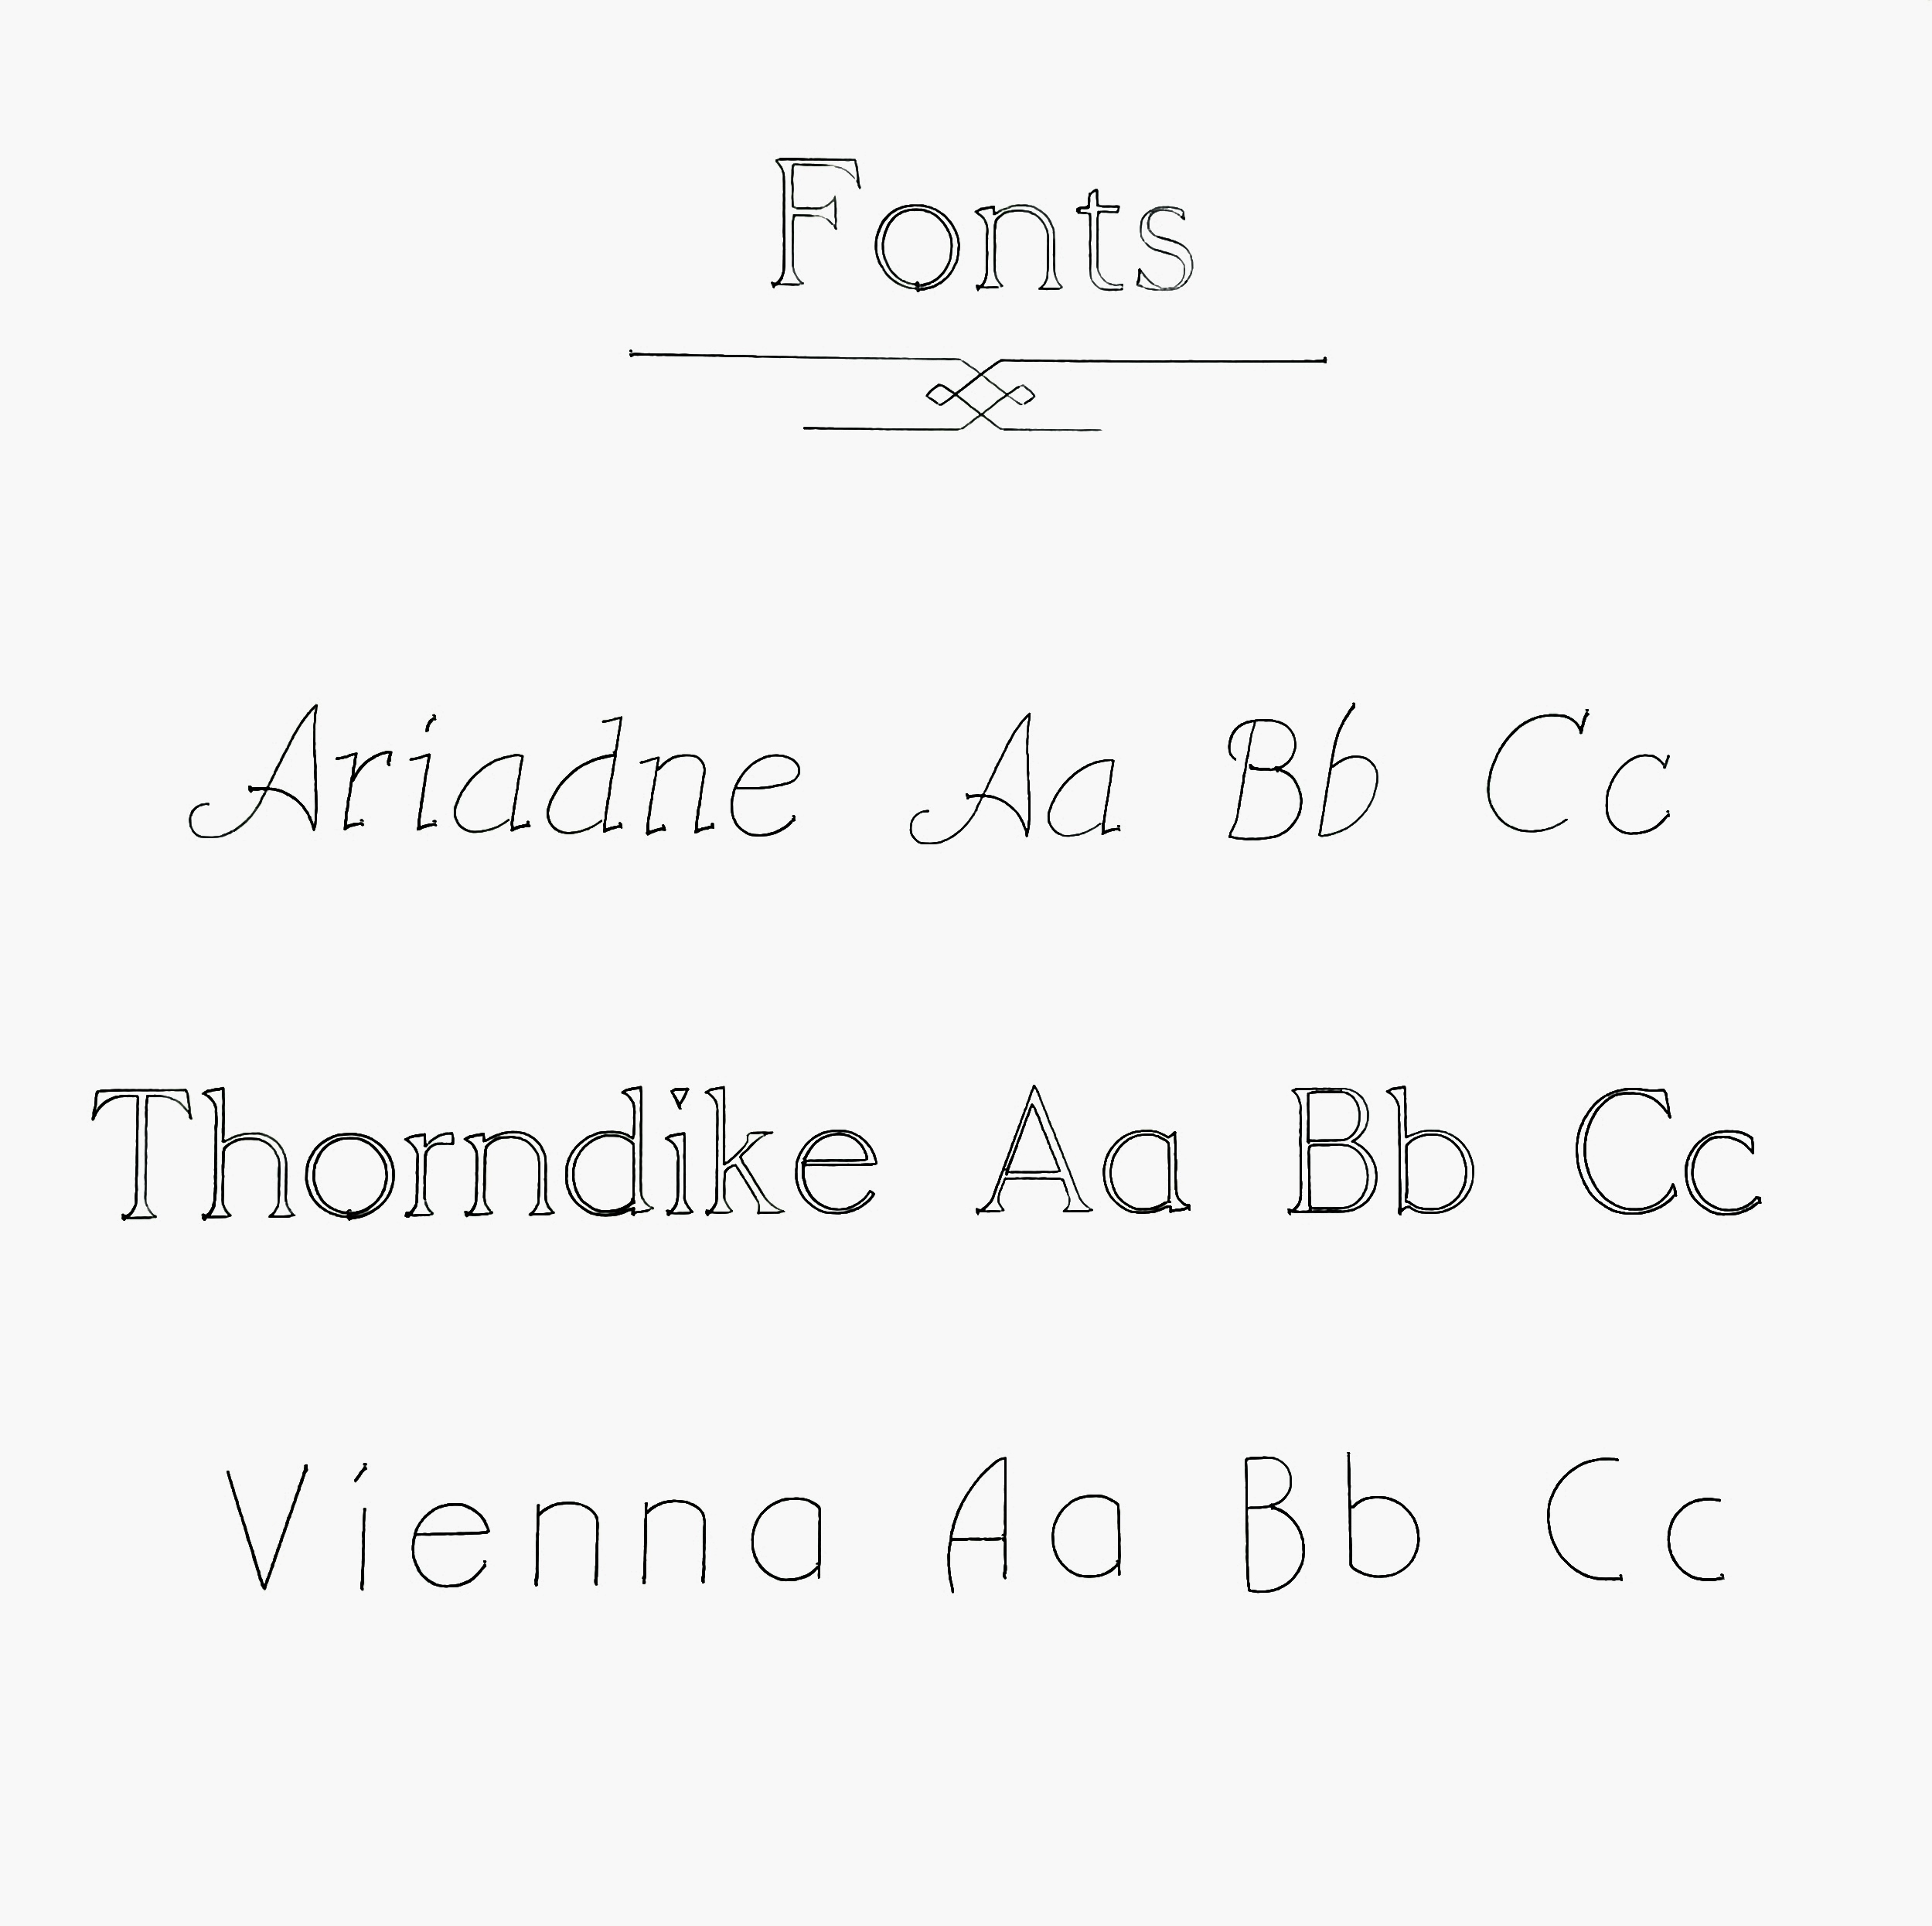 A choice of our 3 fonts we offer.